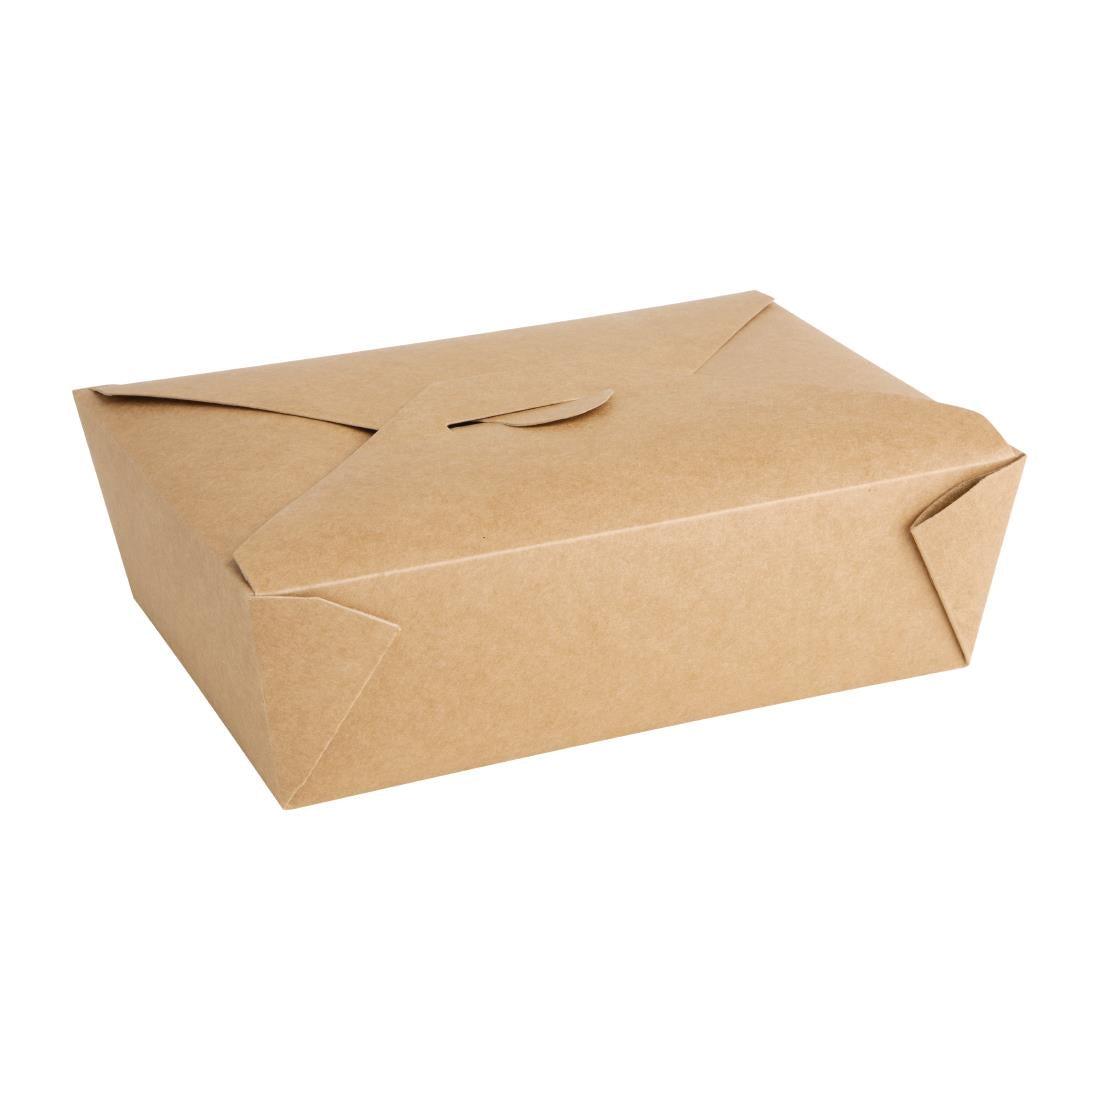 FB675 Fiesta Compostable Paperboard Food Cartons 1800ml / 63oz (Pack of 200) JD Catering Equipment Solutions Ltd